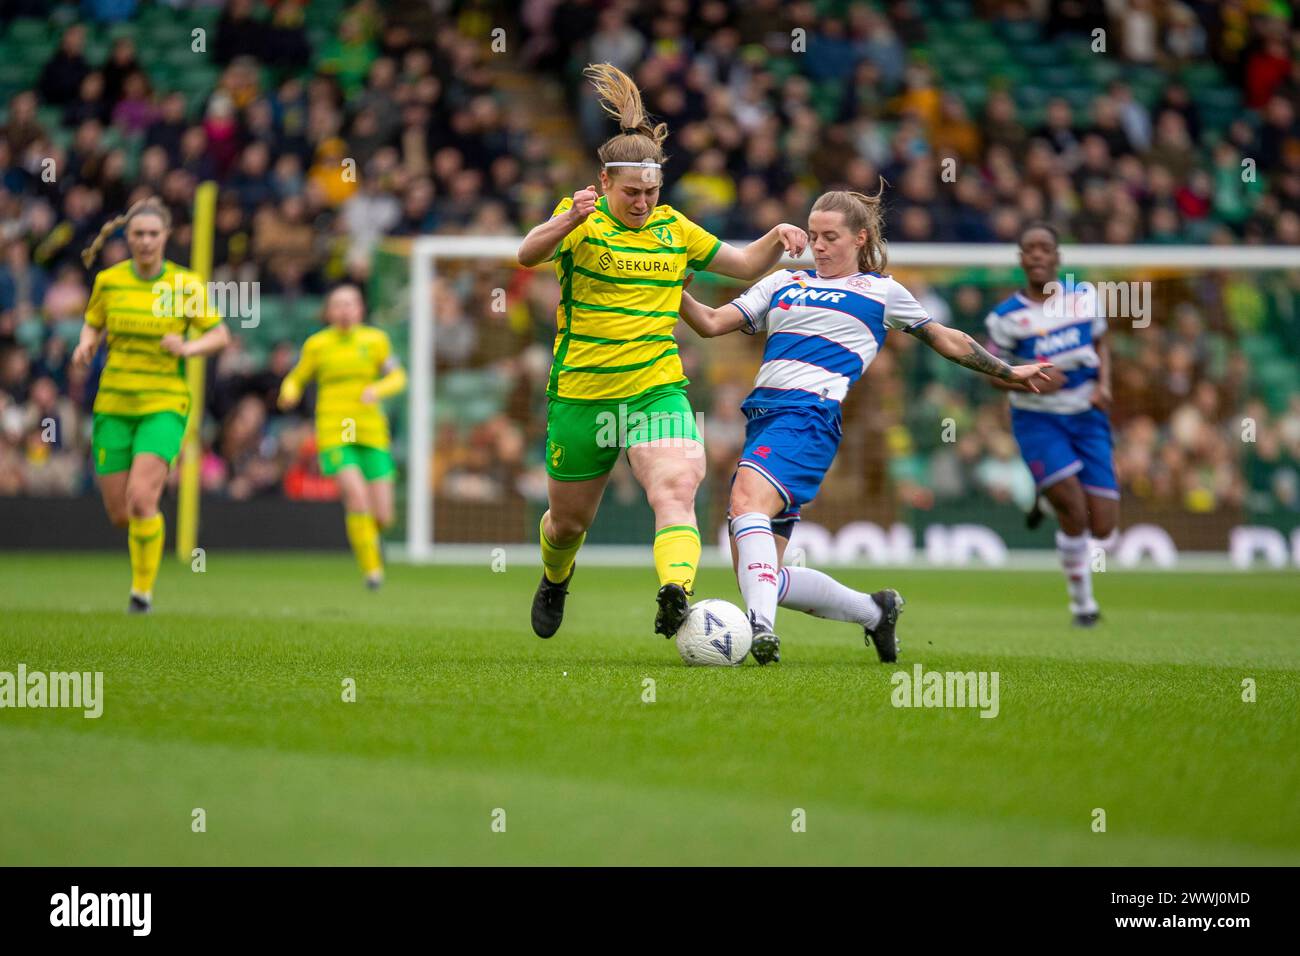 Norwich on Sunday 24th March 2024. Ceri Flye of Norwich City is tacked by Jo Blodgett of Queens Park Rangers during the FA Women's National League Division One match between Norwich City Women and Queens Park Rangers at Carrow Road, Norwich on Sunday 24th March 2024. (Photo: David Watts | MI News) Credit: MI News & Sport /Alamy Live News Stock Photo